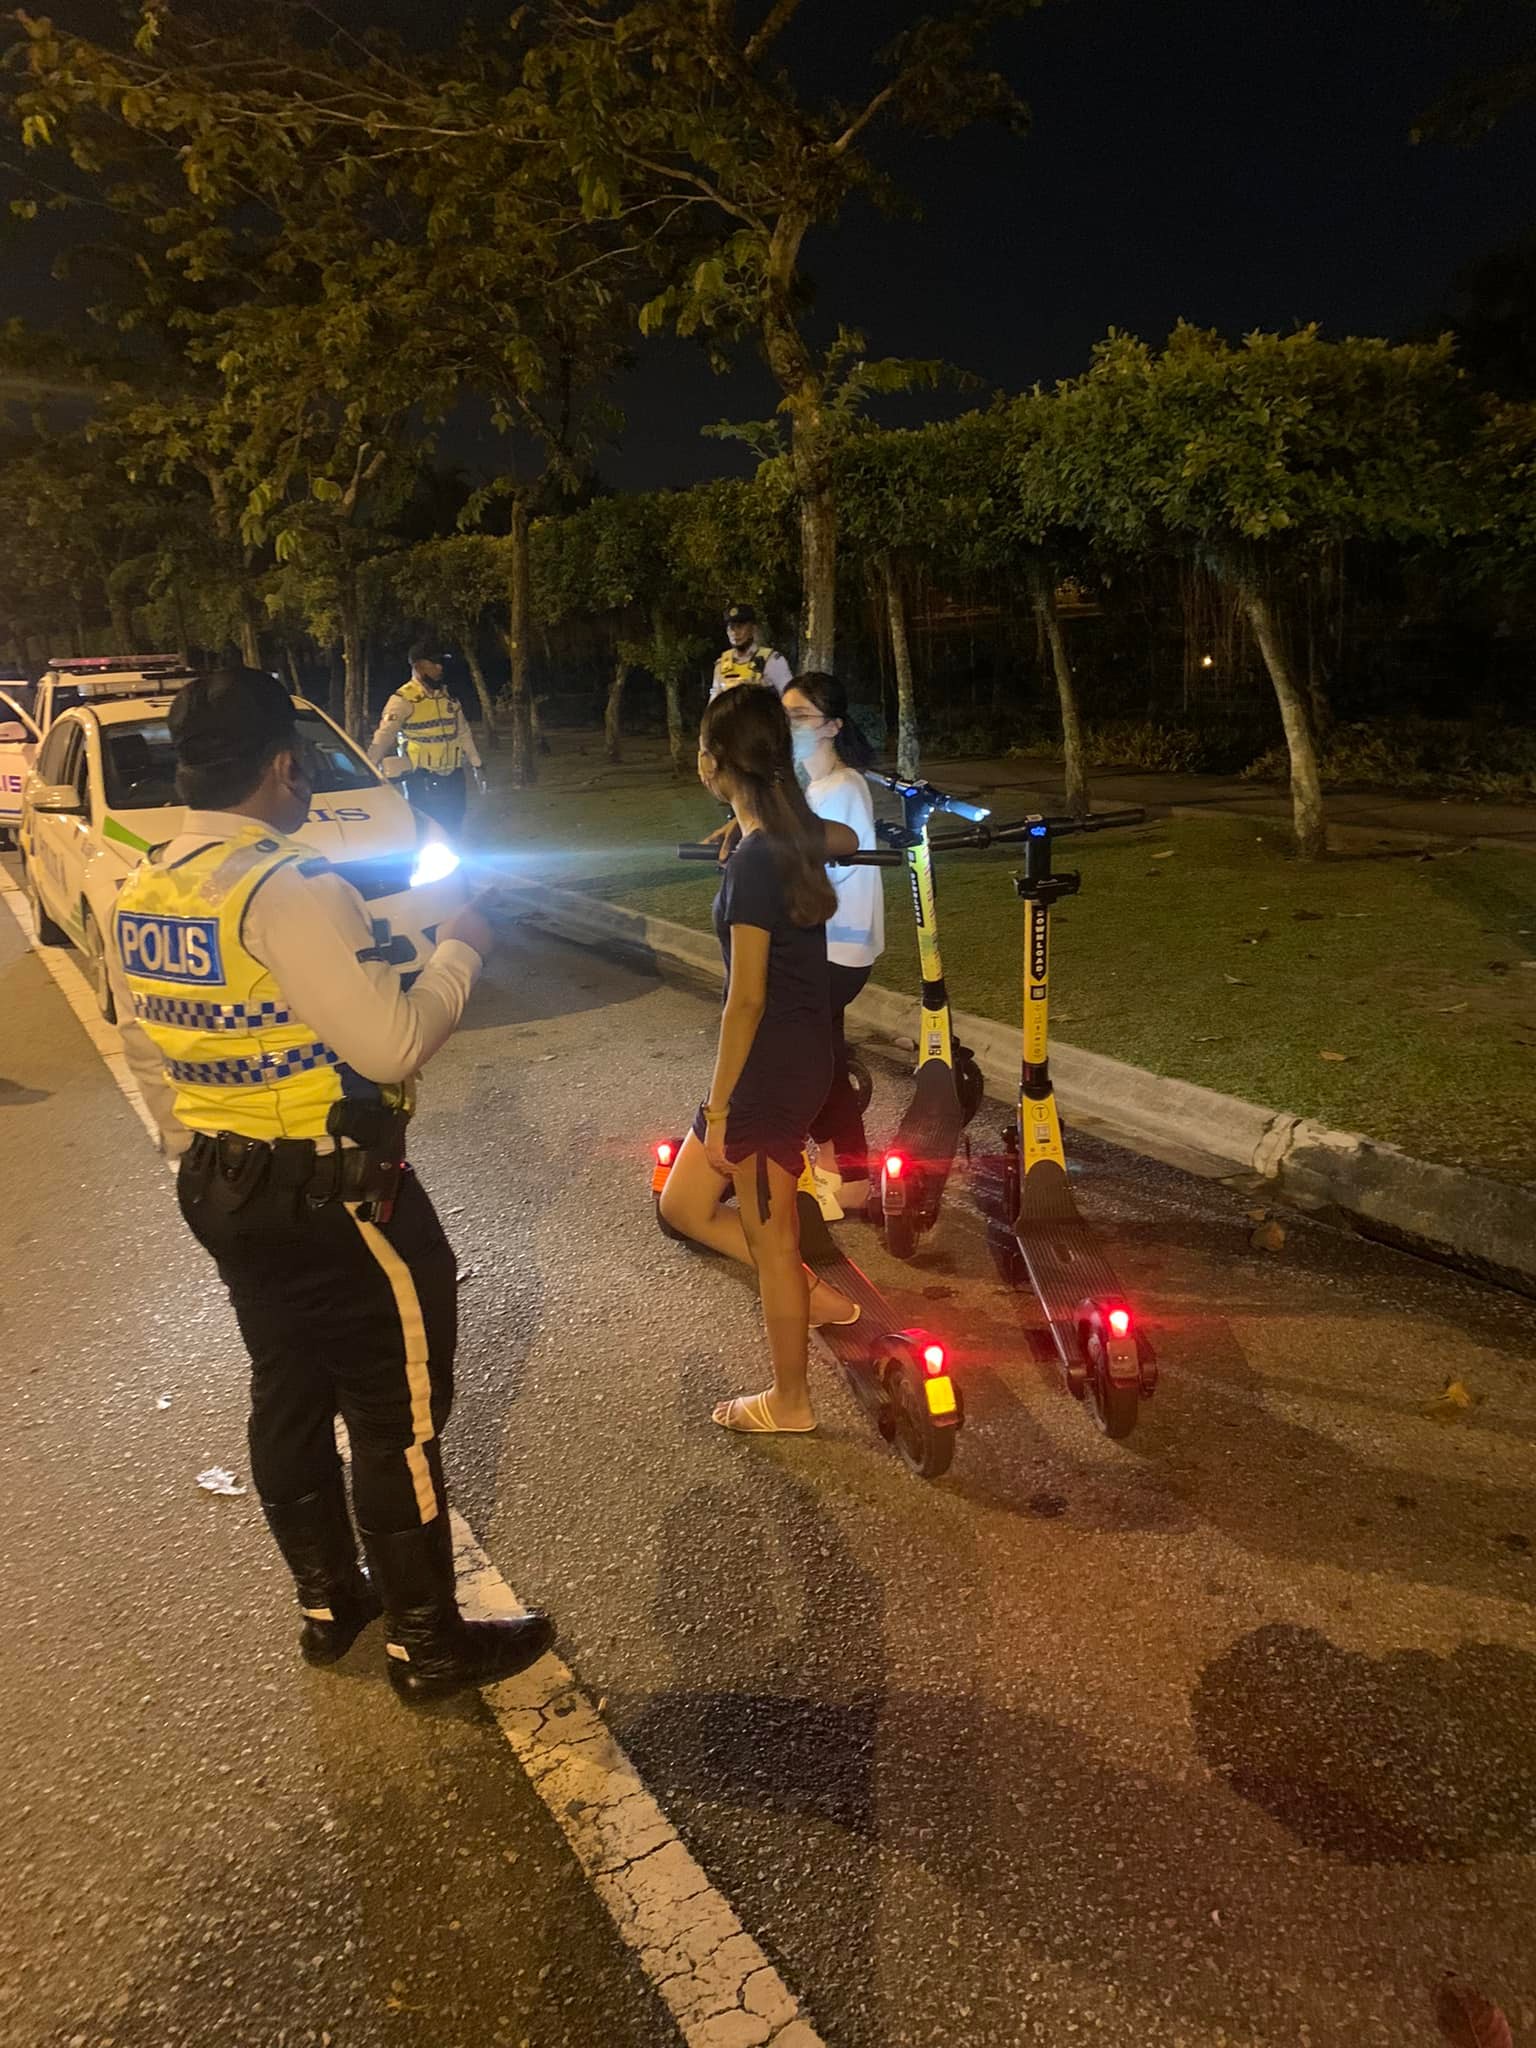 E-scooter riders in Cyberjaya were issued warnings by the traffic police. Source: Trafik IPD Sepang